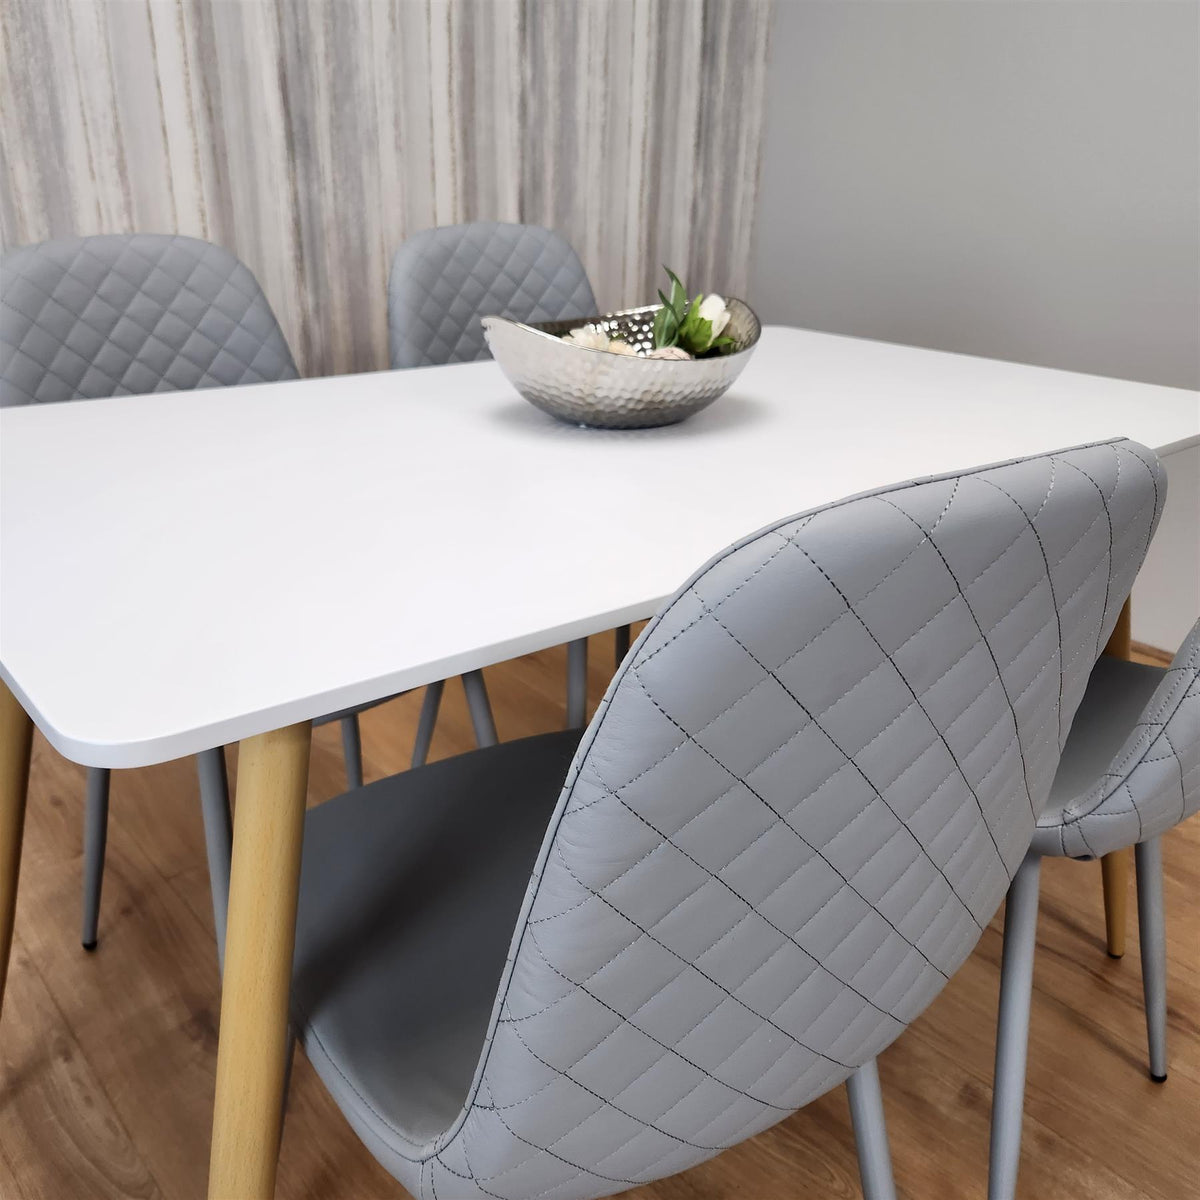 Wooden Dining Table with 4 Grey Gem Patterned Chairs White Table with Grey Chairs